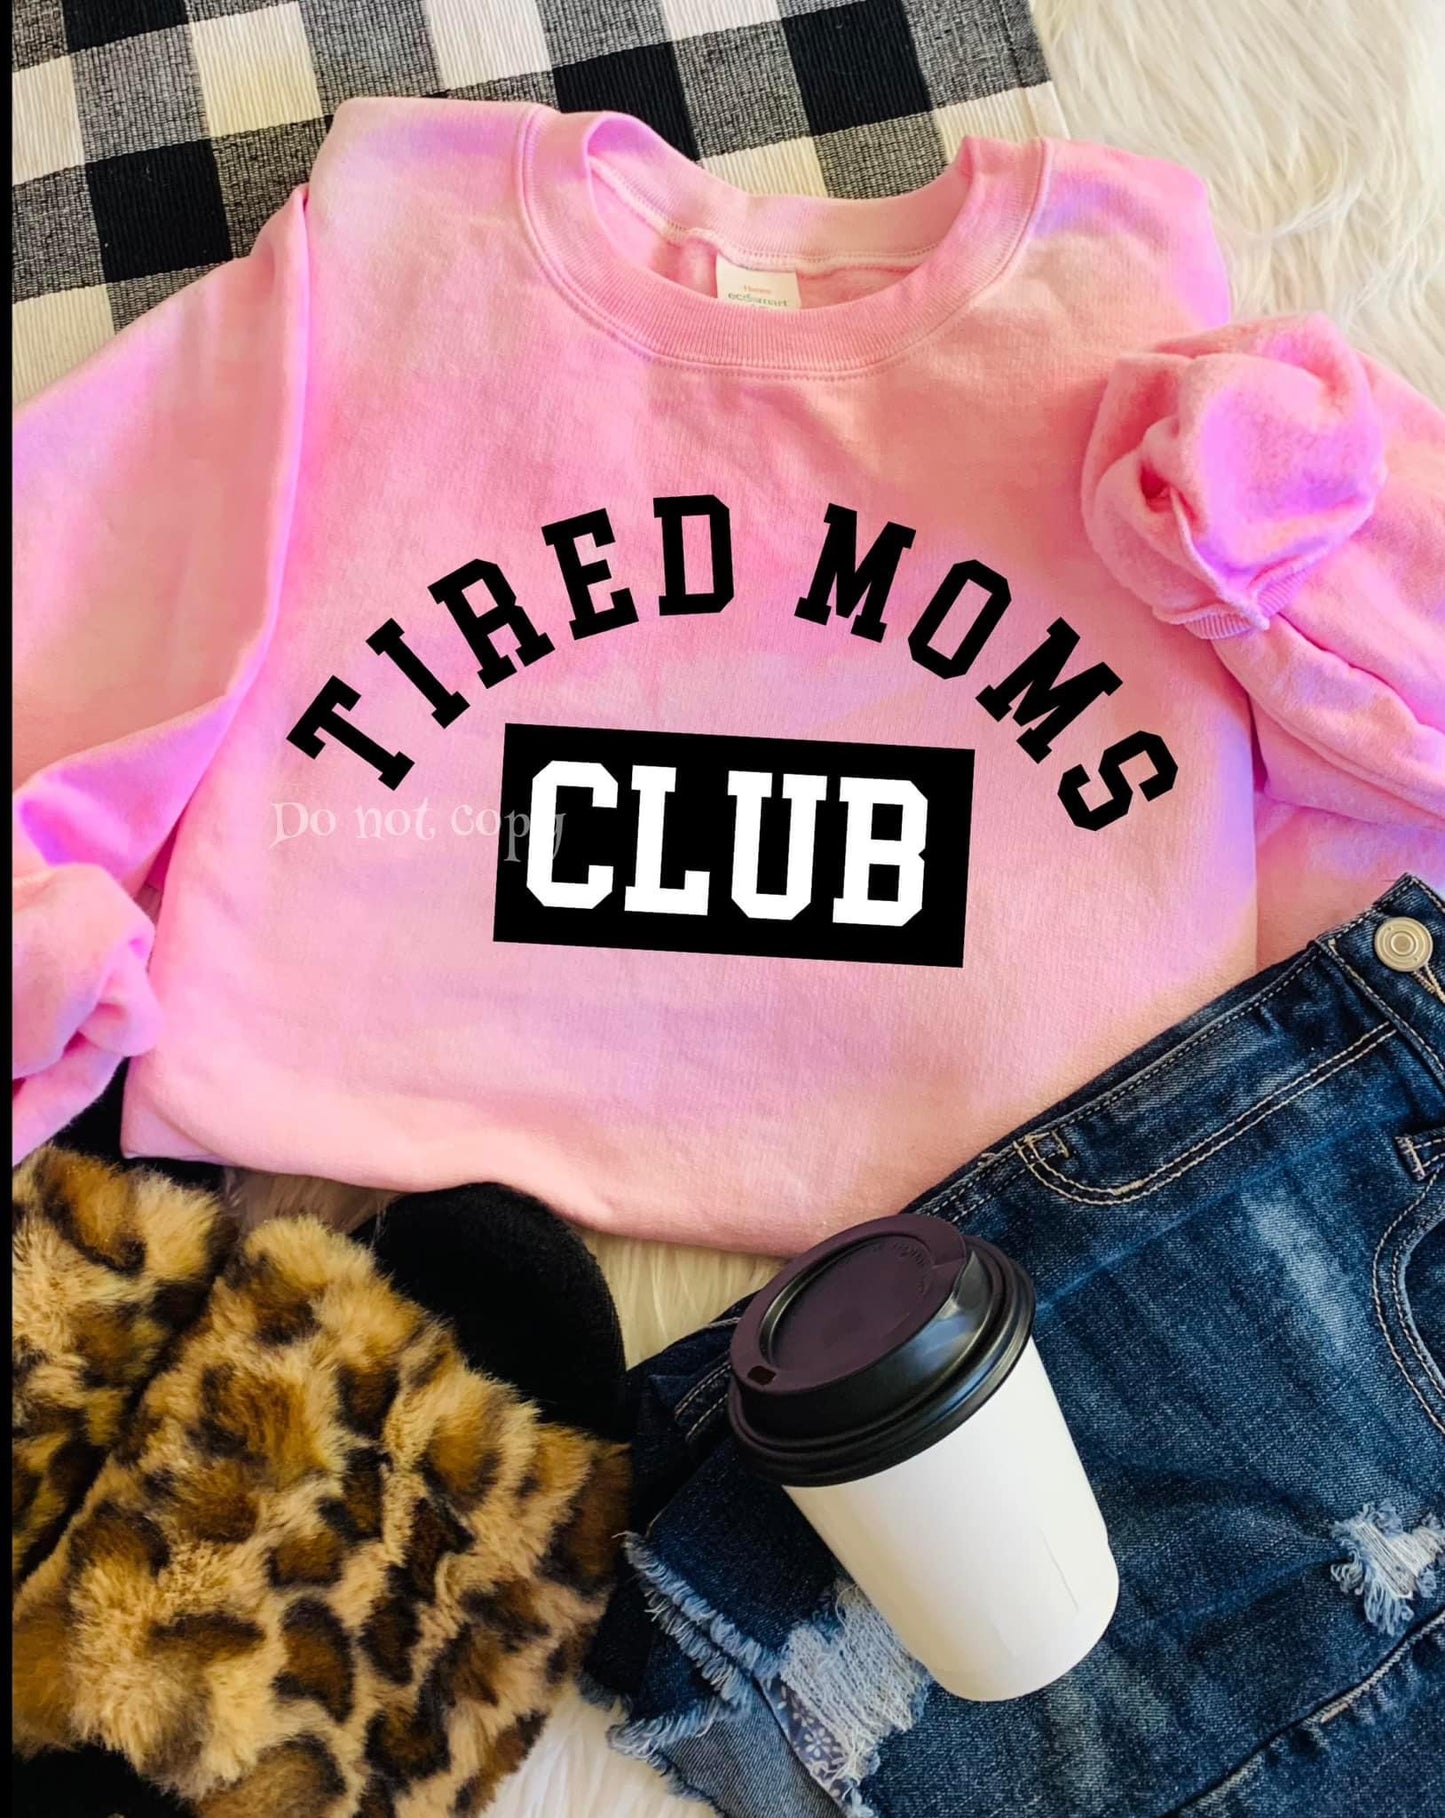 Tired Moms Club 🖤